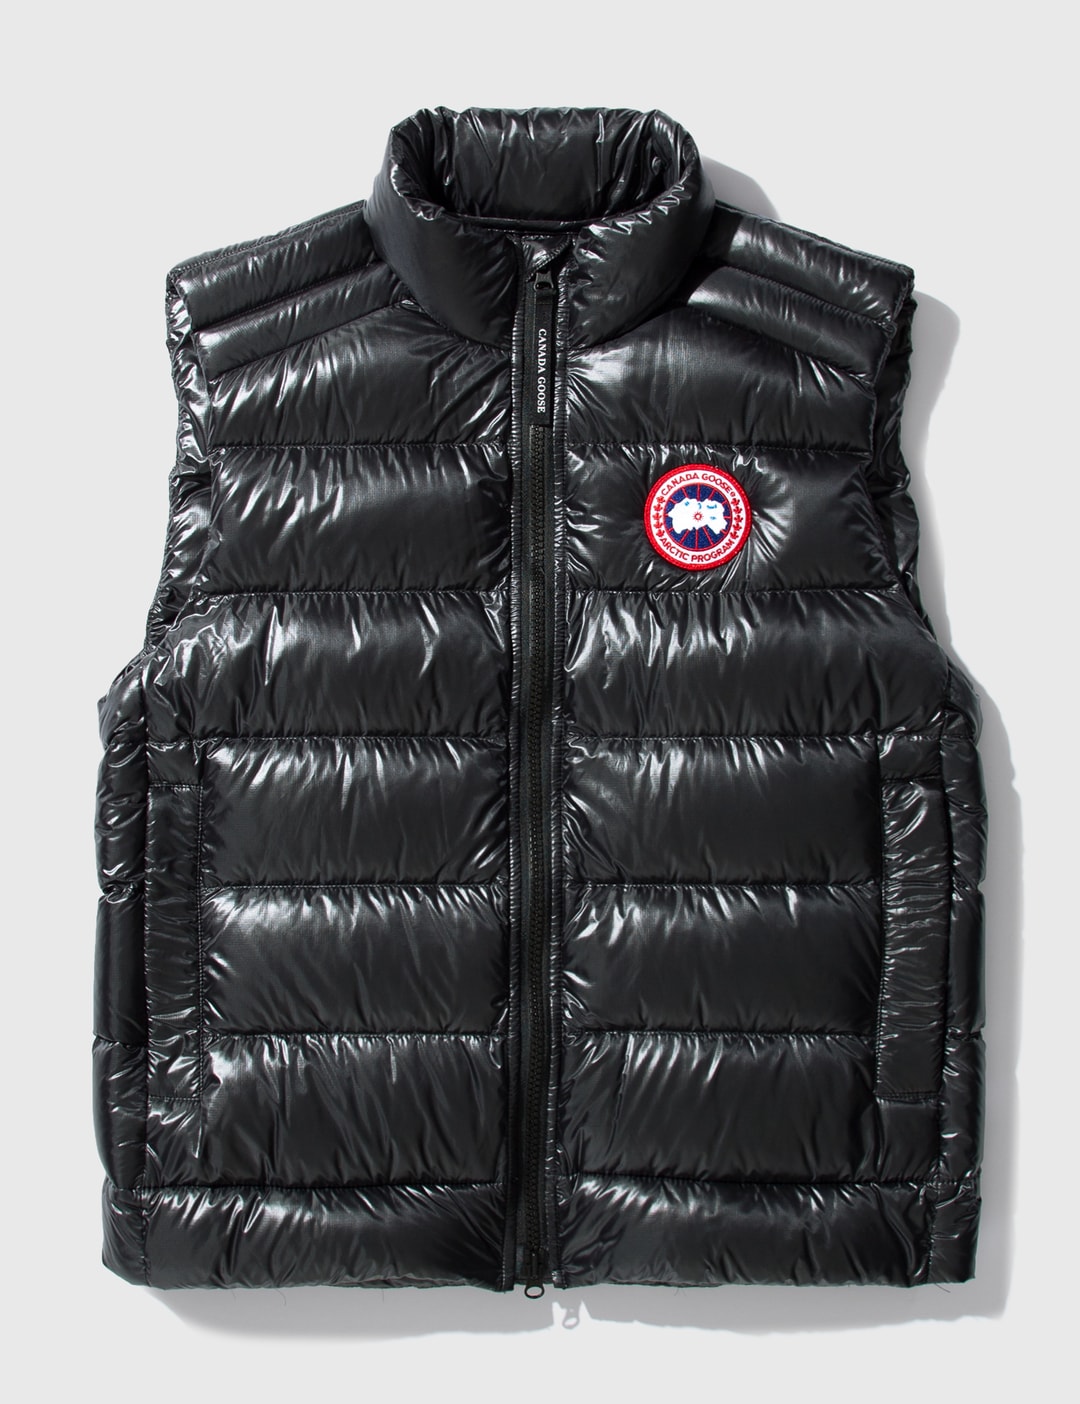 Canada Goose - Crofton Vest | HBX - Globally Curated Fashion and ...